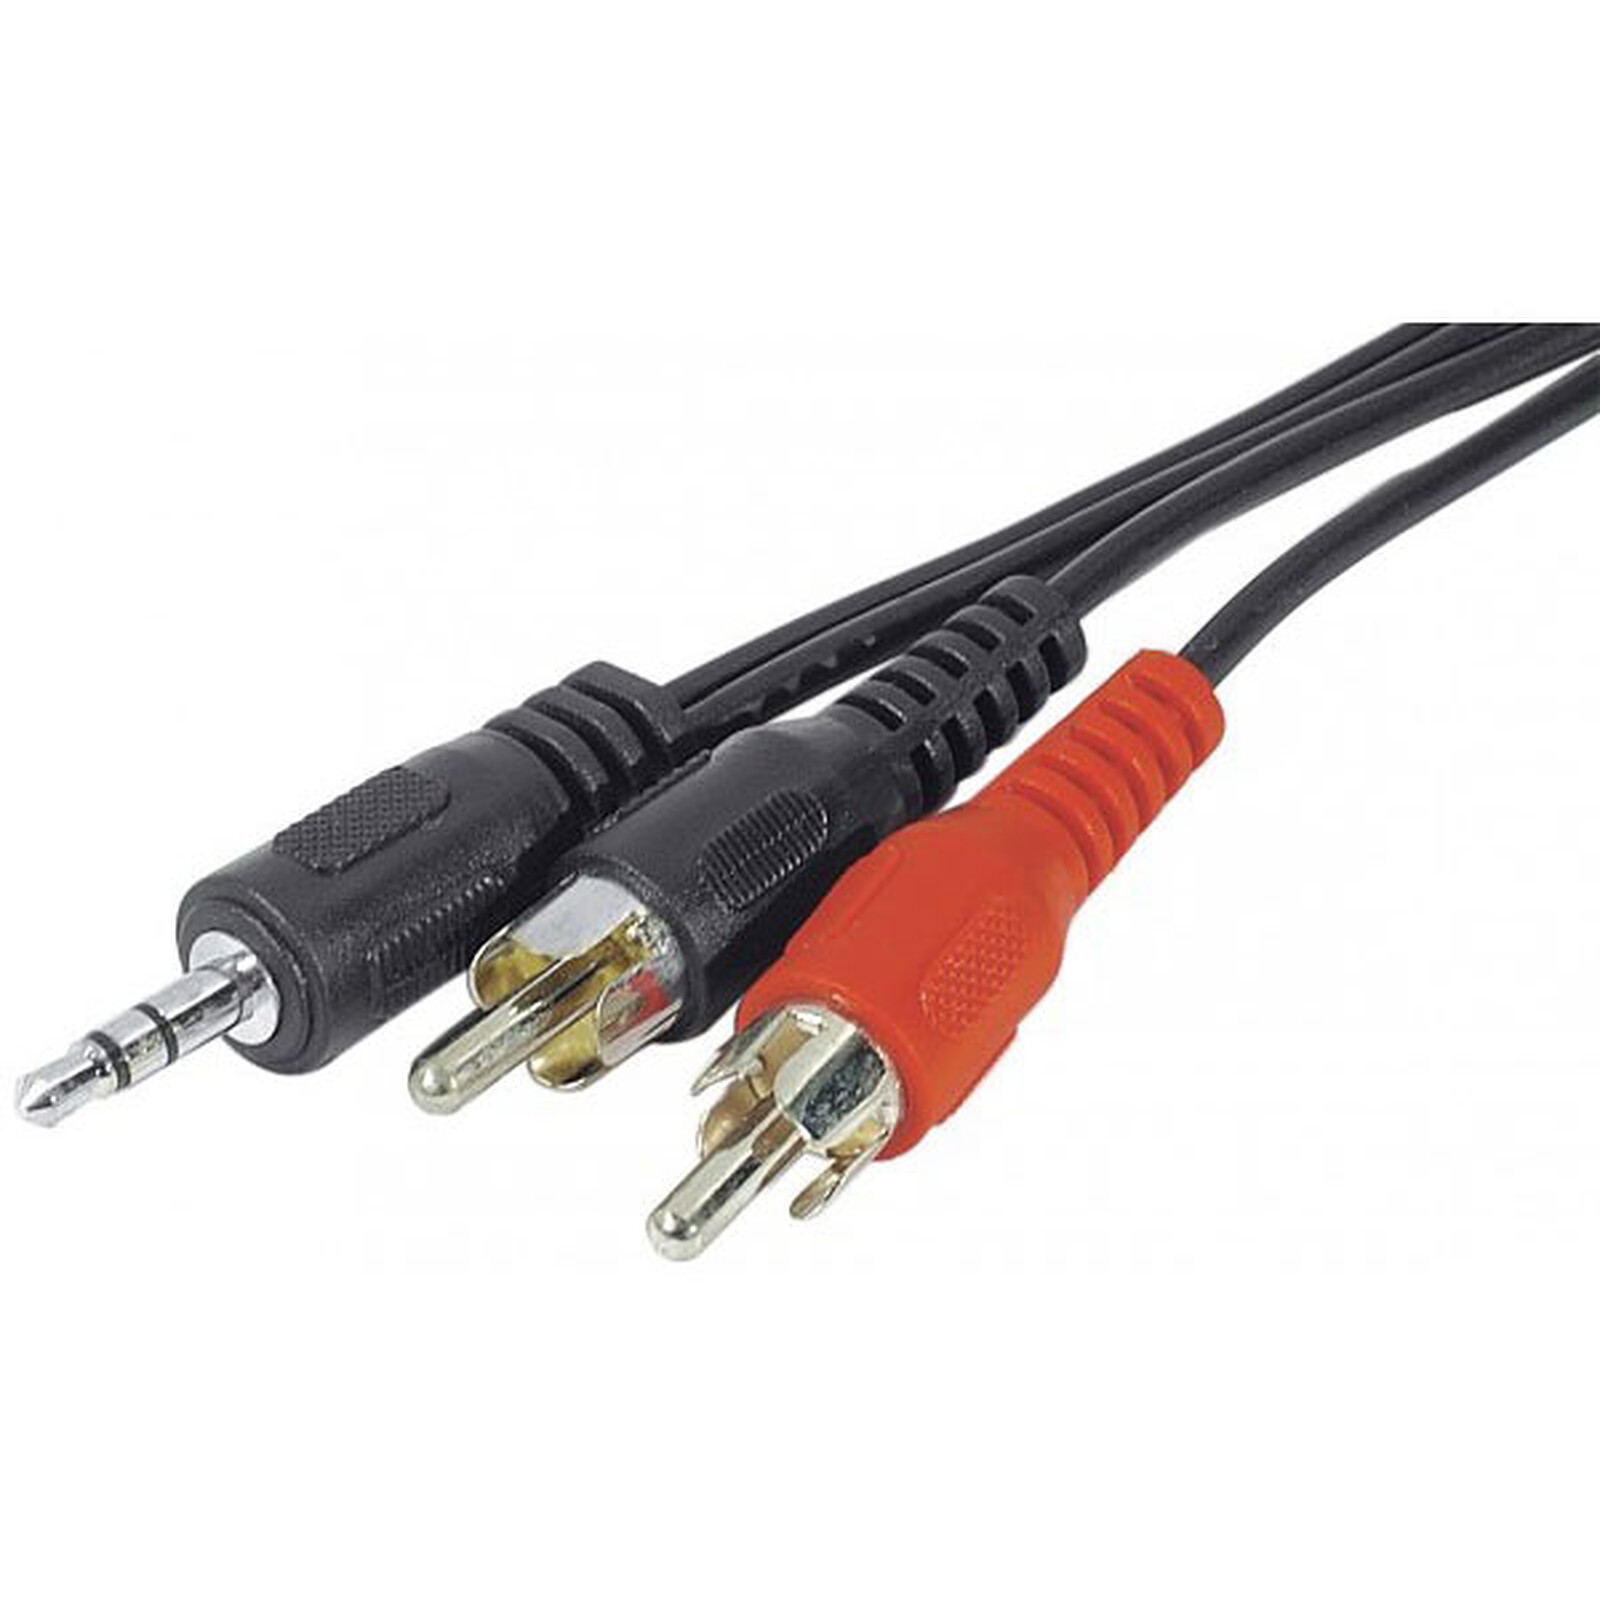 Cable prise Jack 3mm5 vers 2 RCA male 1m5 - Cdiscount TV Son Photo